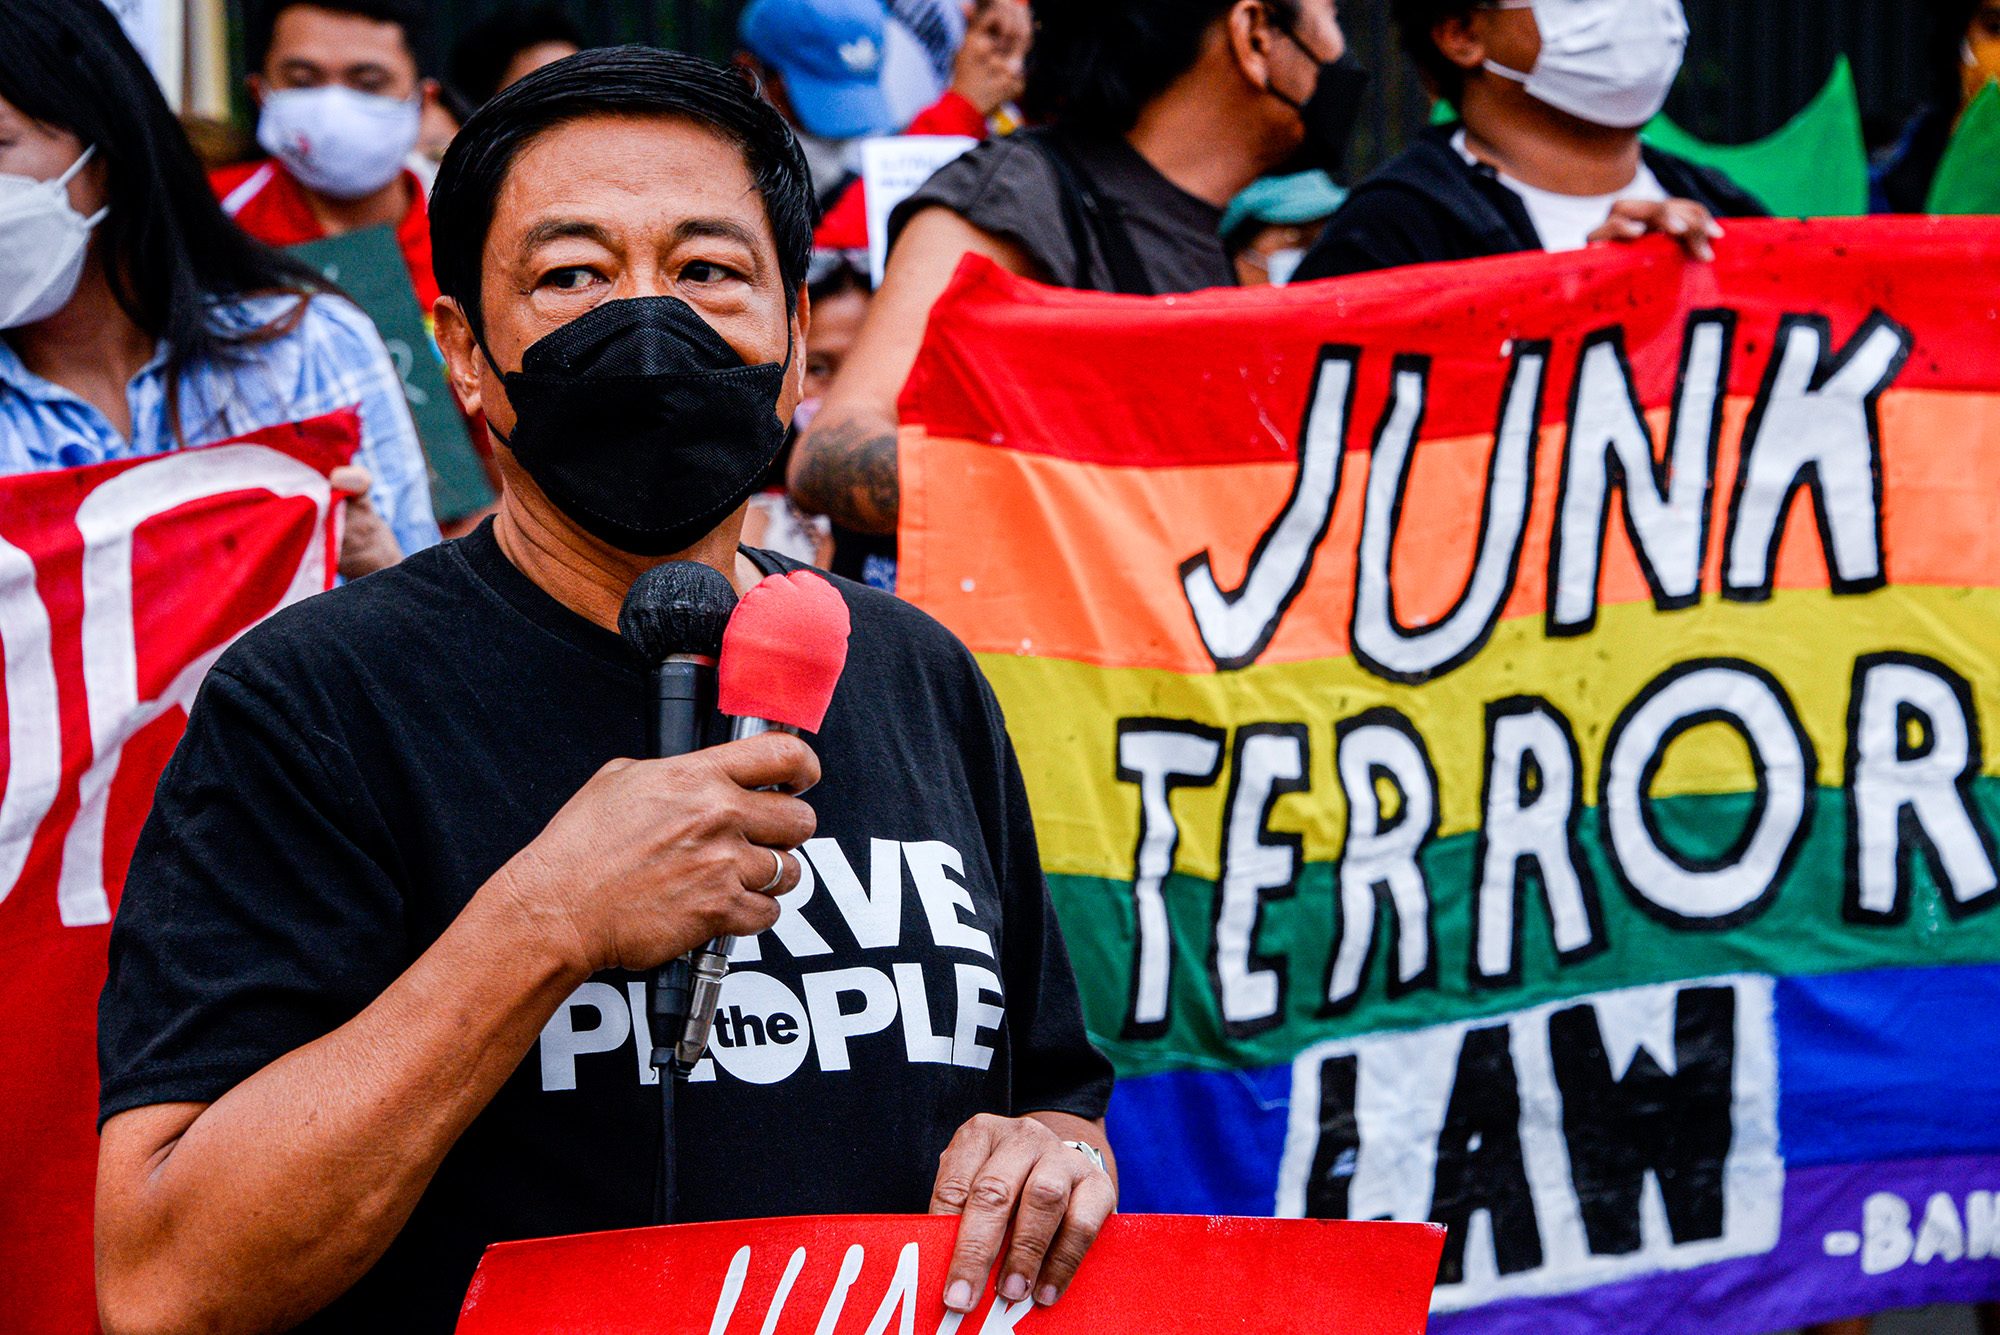 Anti-terror law parts declared unconstitutional only ‘minimal,’ says Año